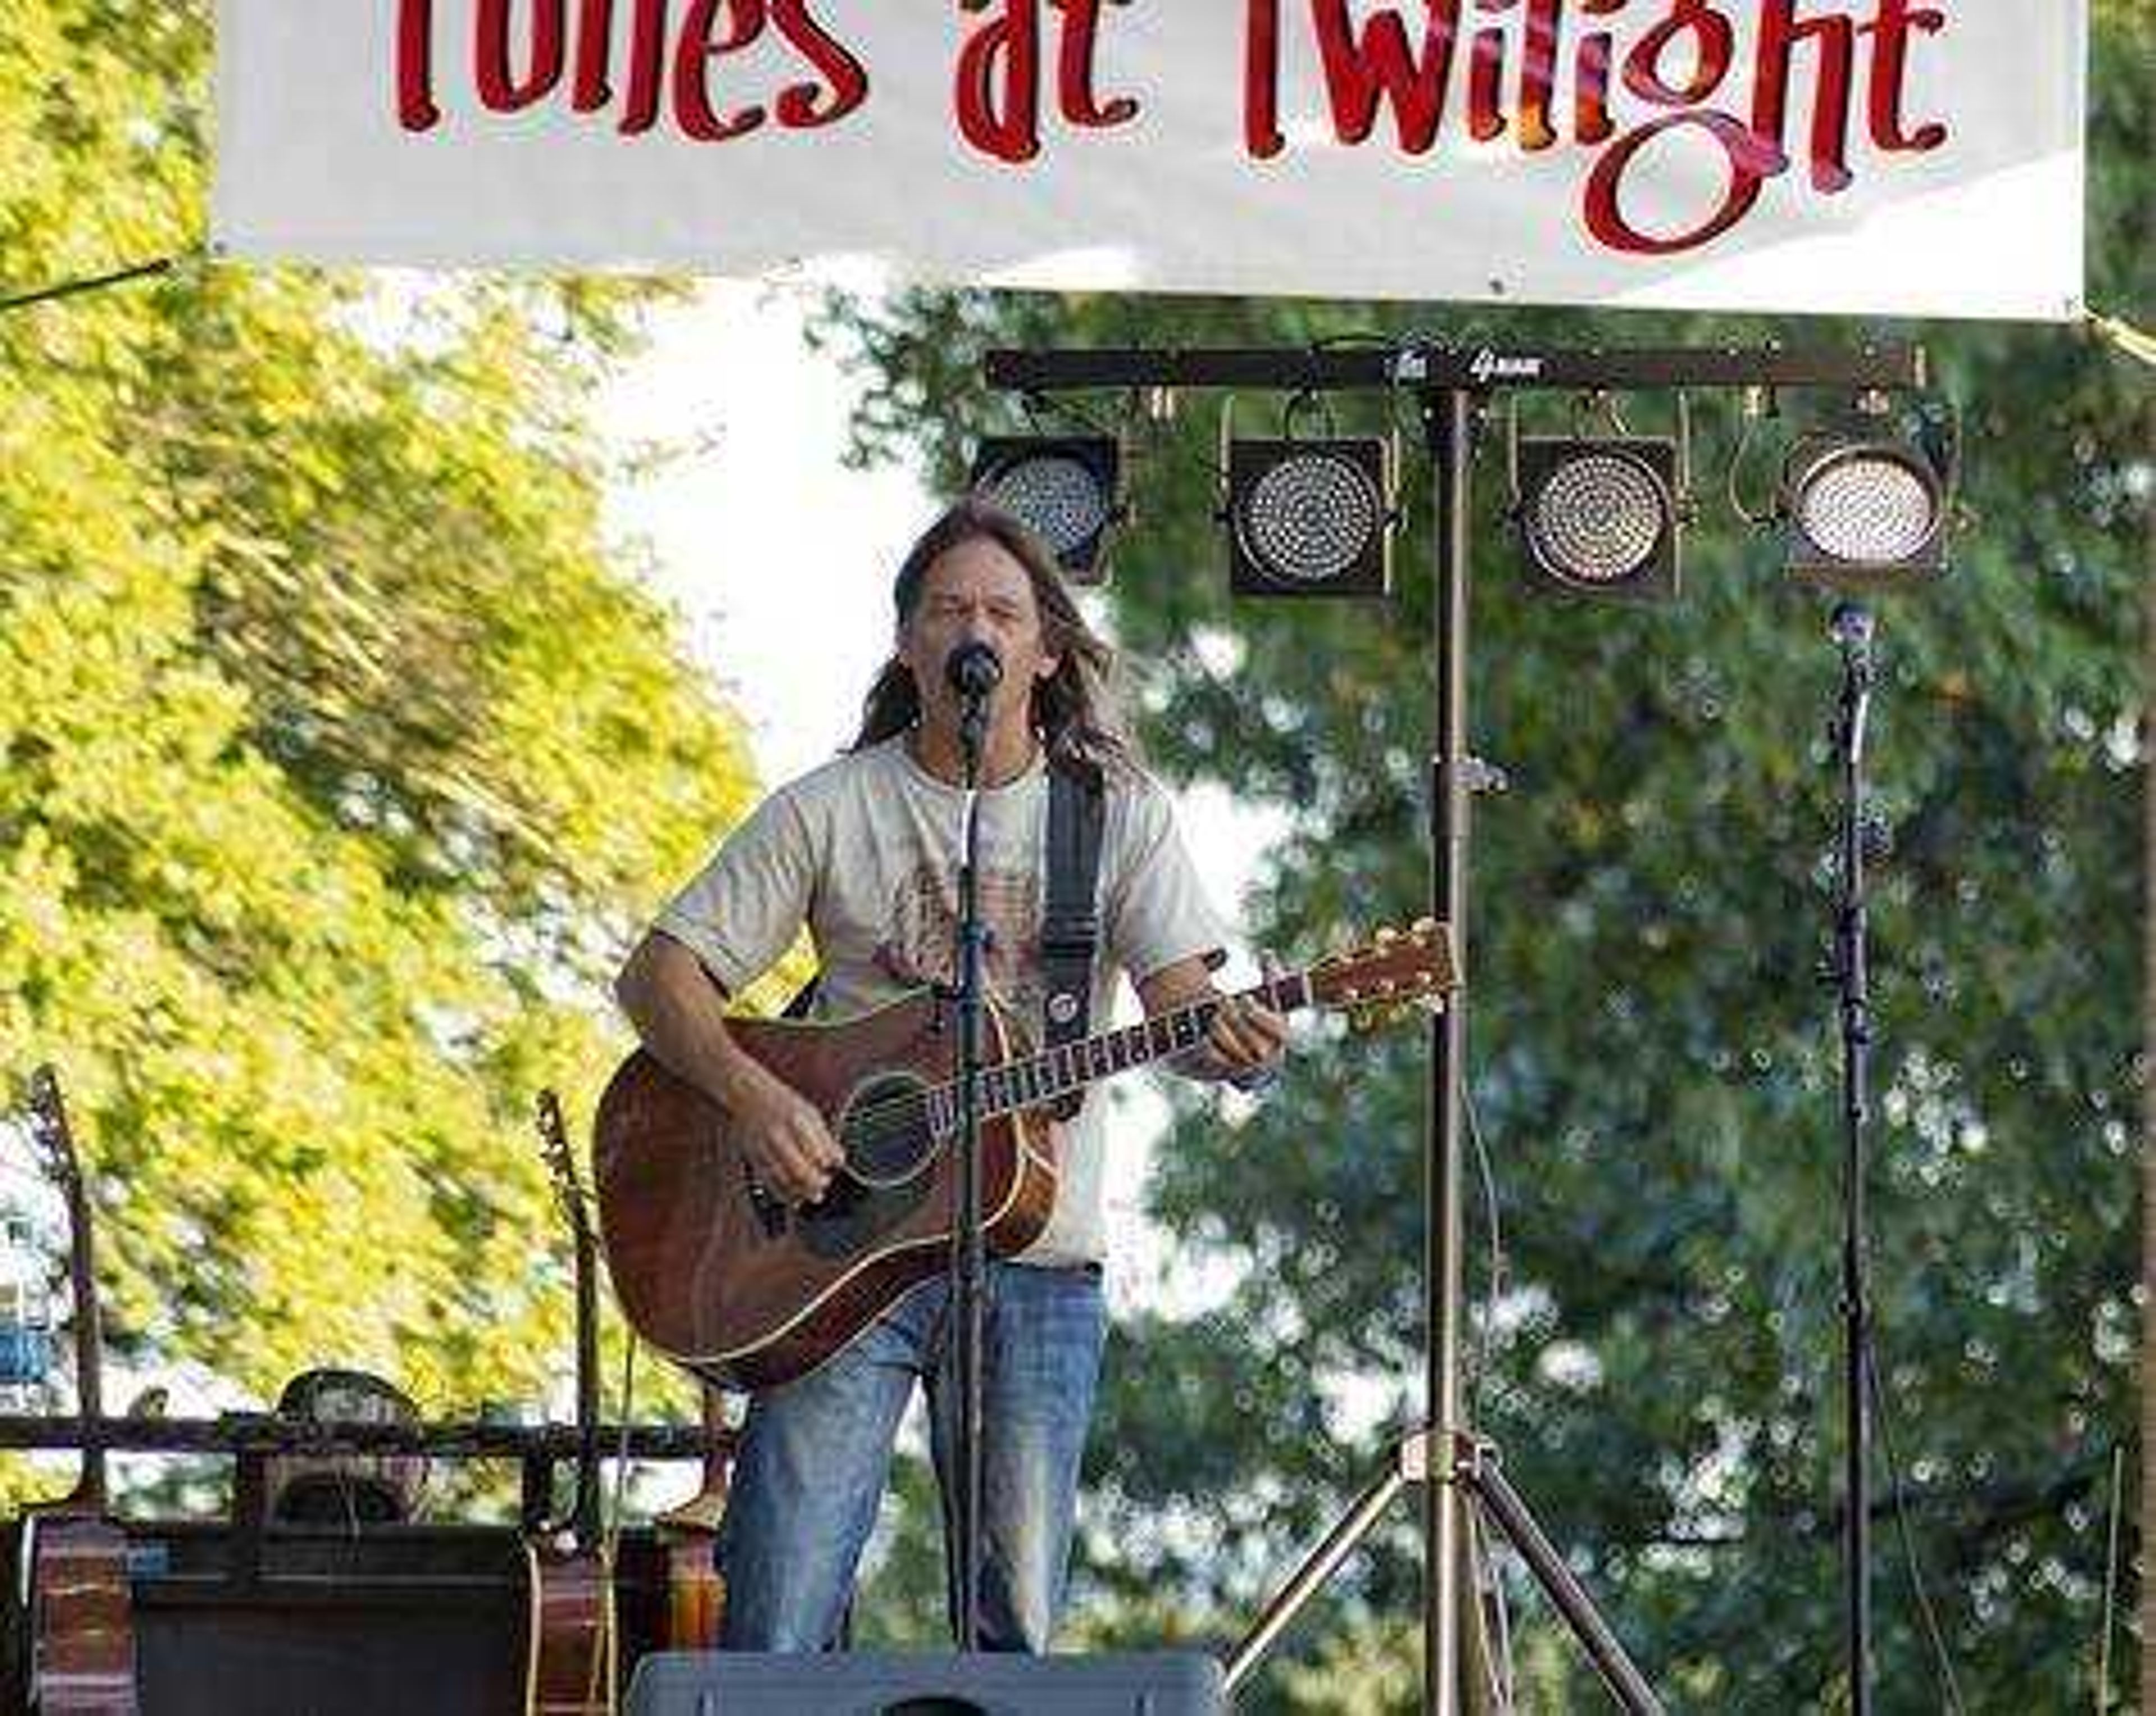 Jimmy Davis performs first concert of the fall for the Tunes at Twilight concert series Aug. 17 at the Commonplace Courthouse Gazebo. Photo by Nathan Hamilton